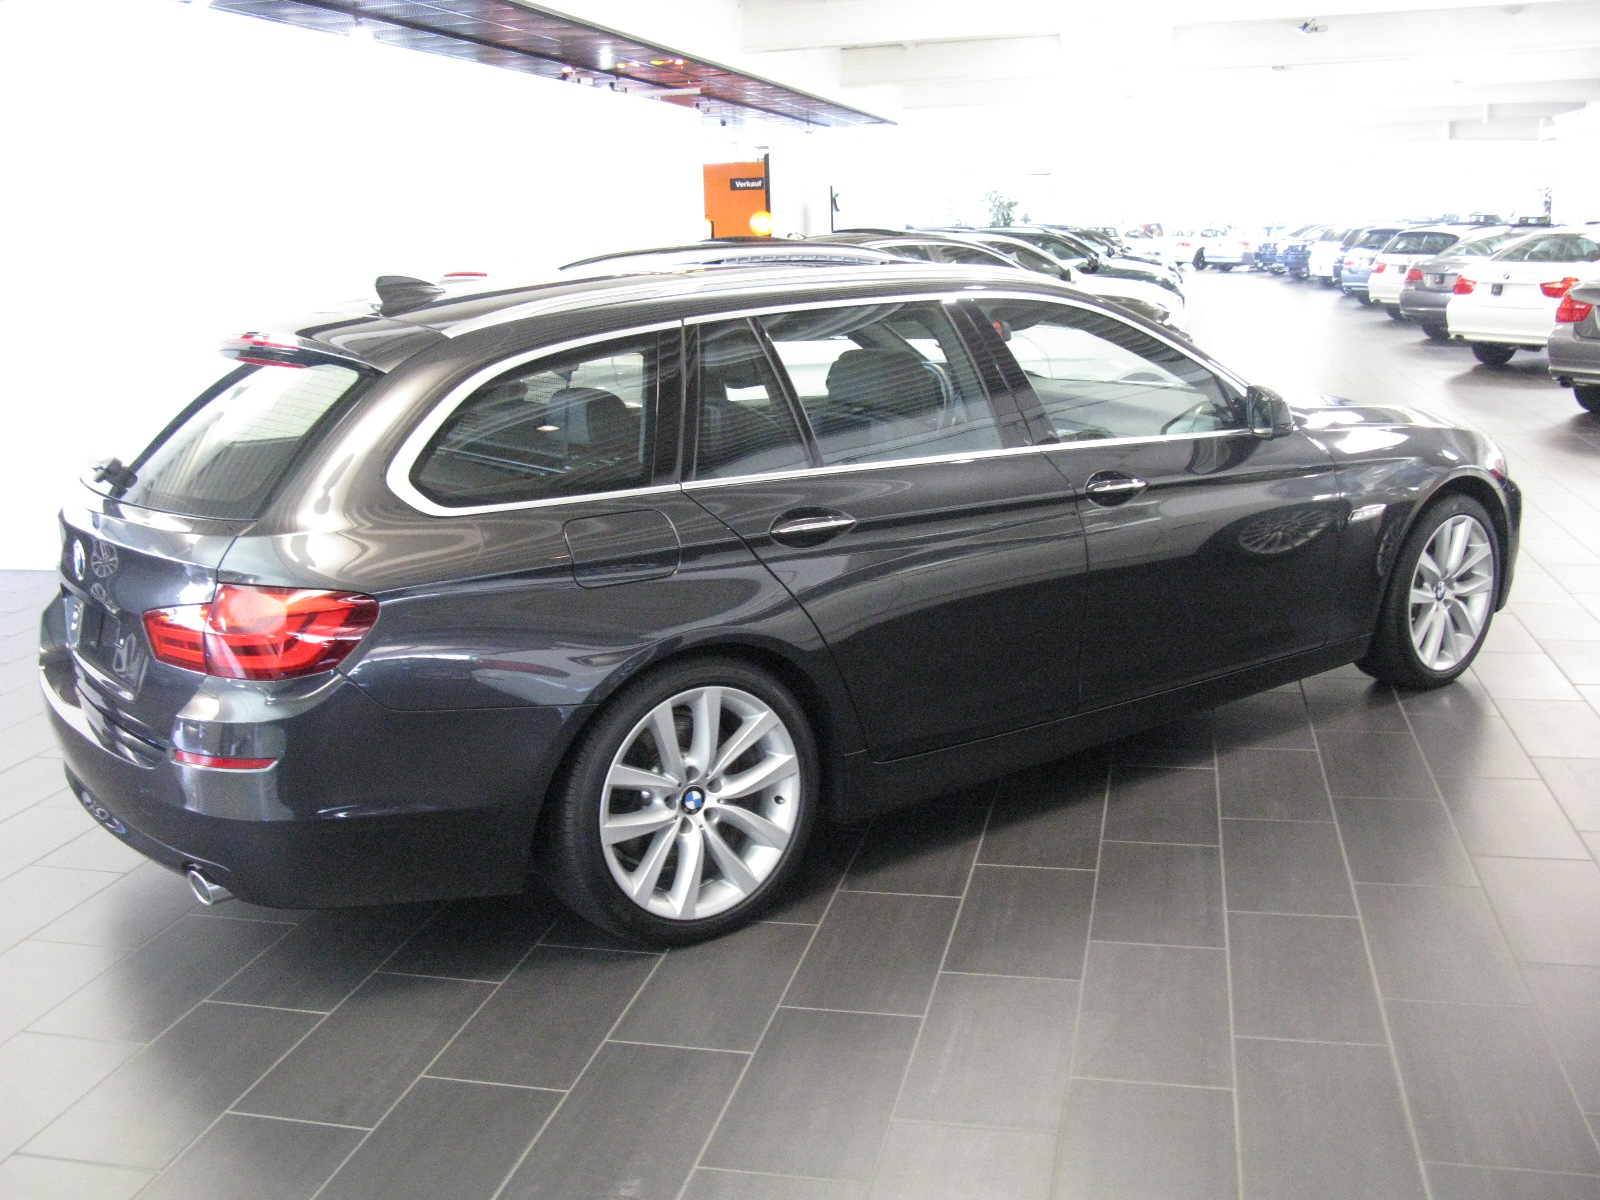 BMW 535d Touring F11 | Flickr - Photo Sharing!